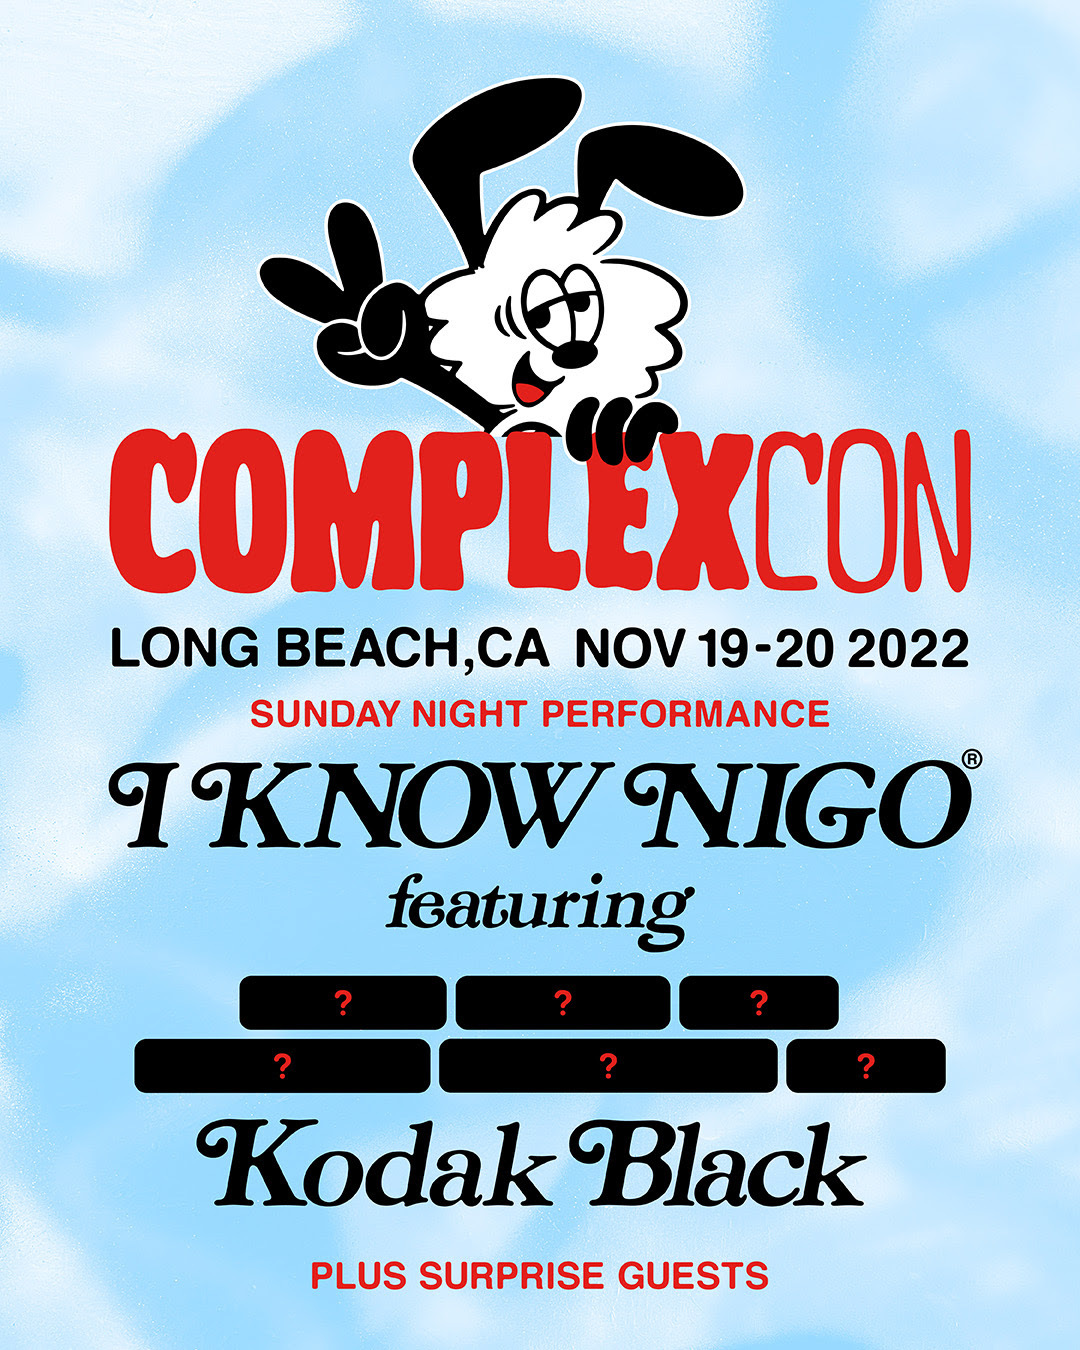 A flyer is shown for a ComplexCon 2022 event